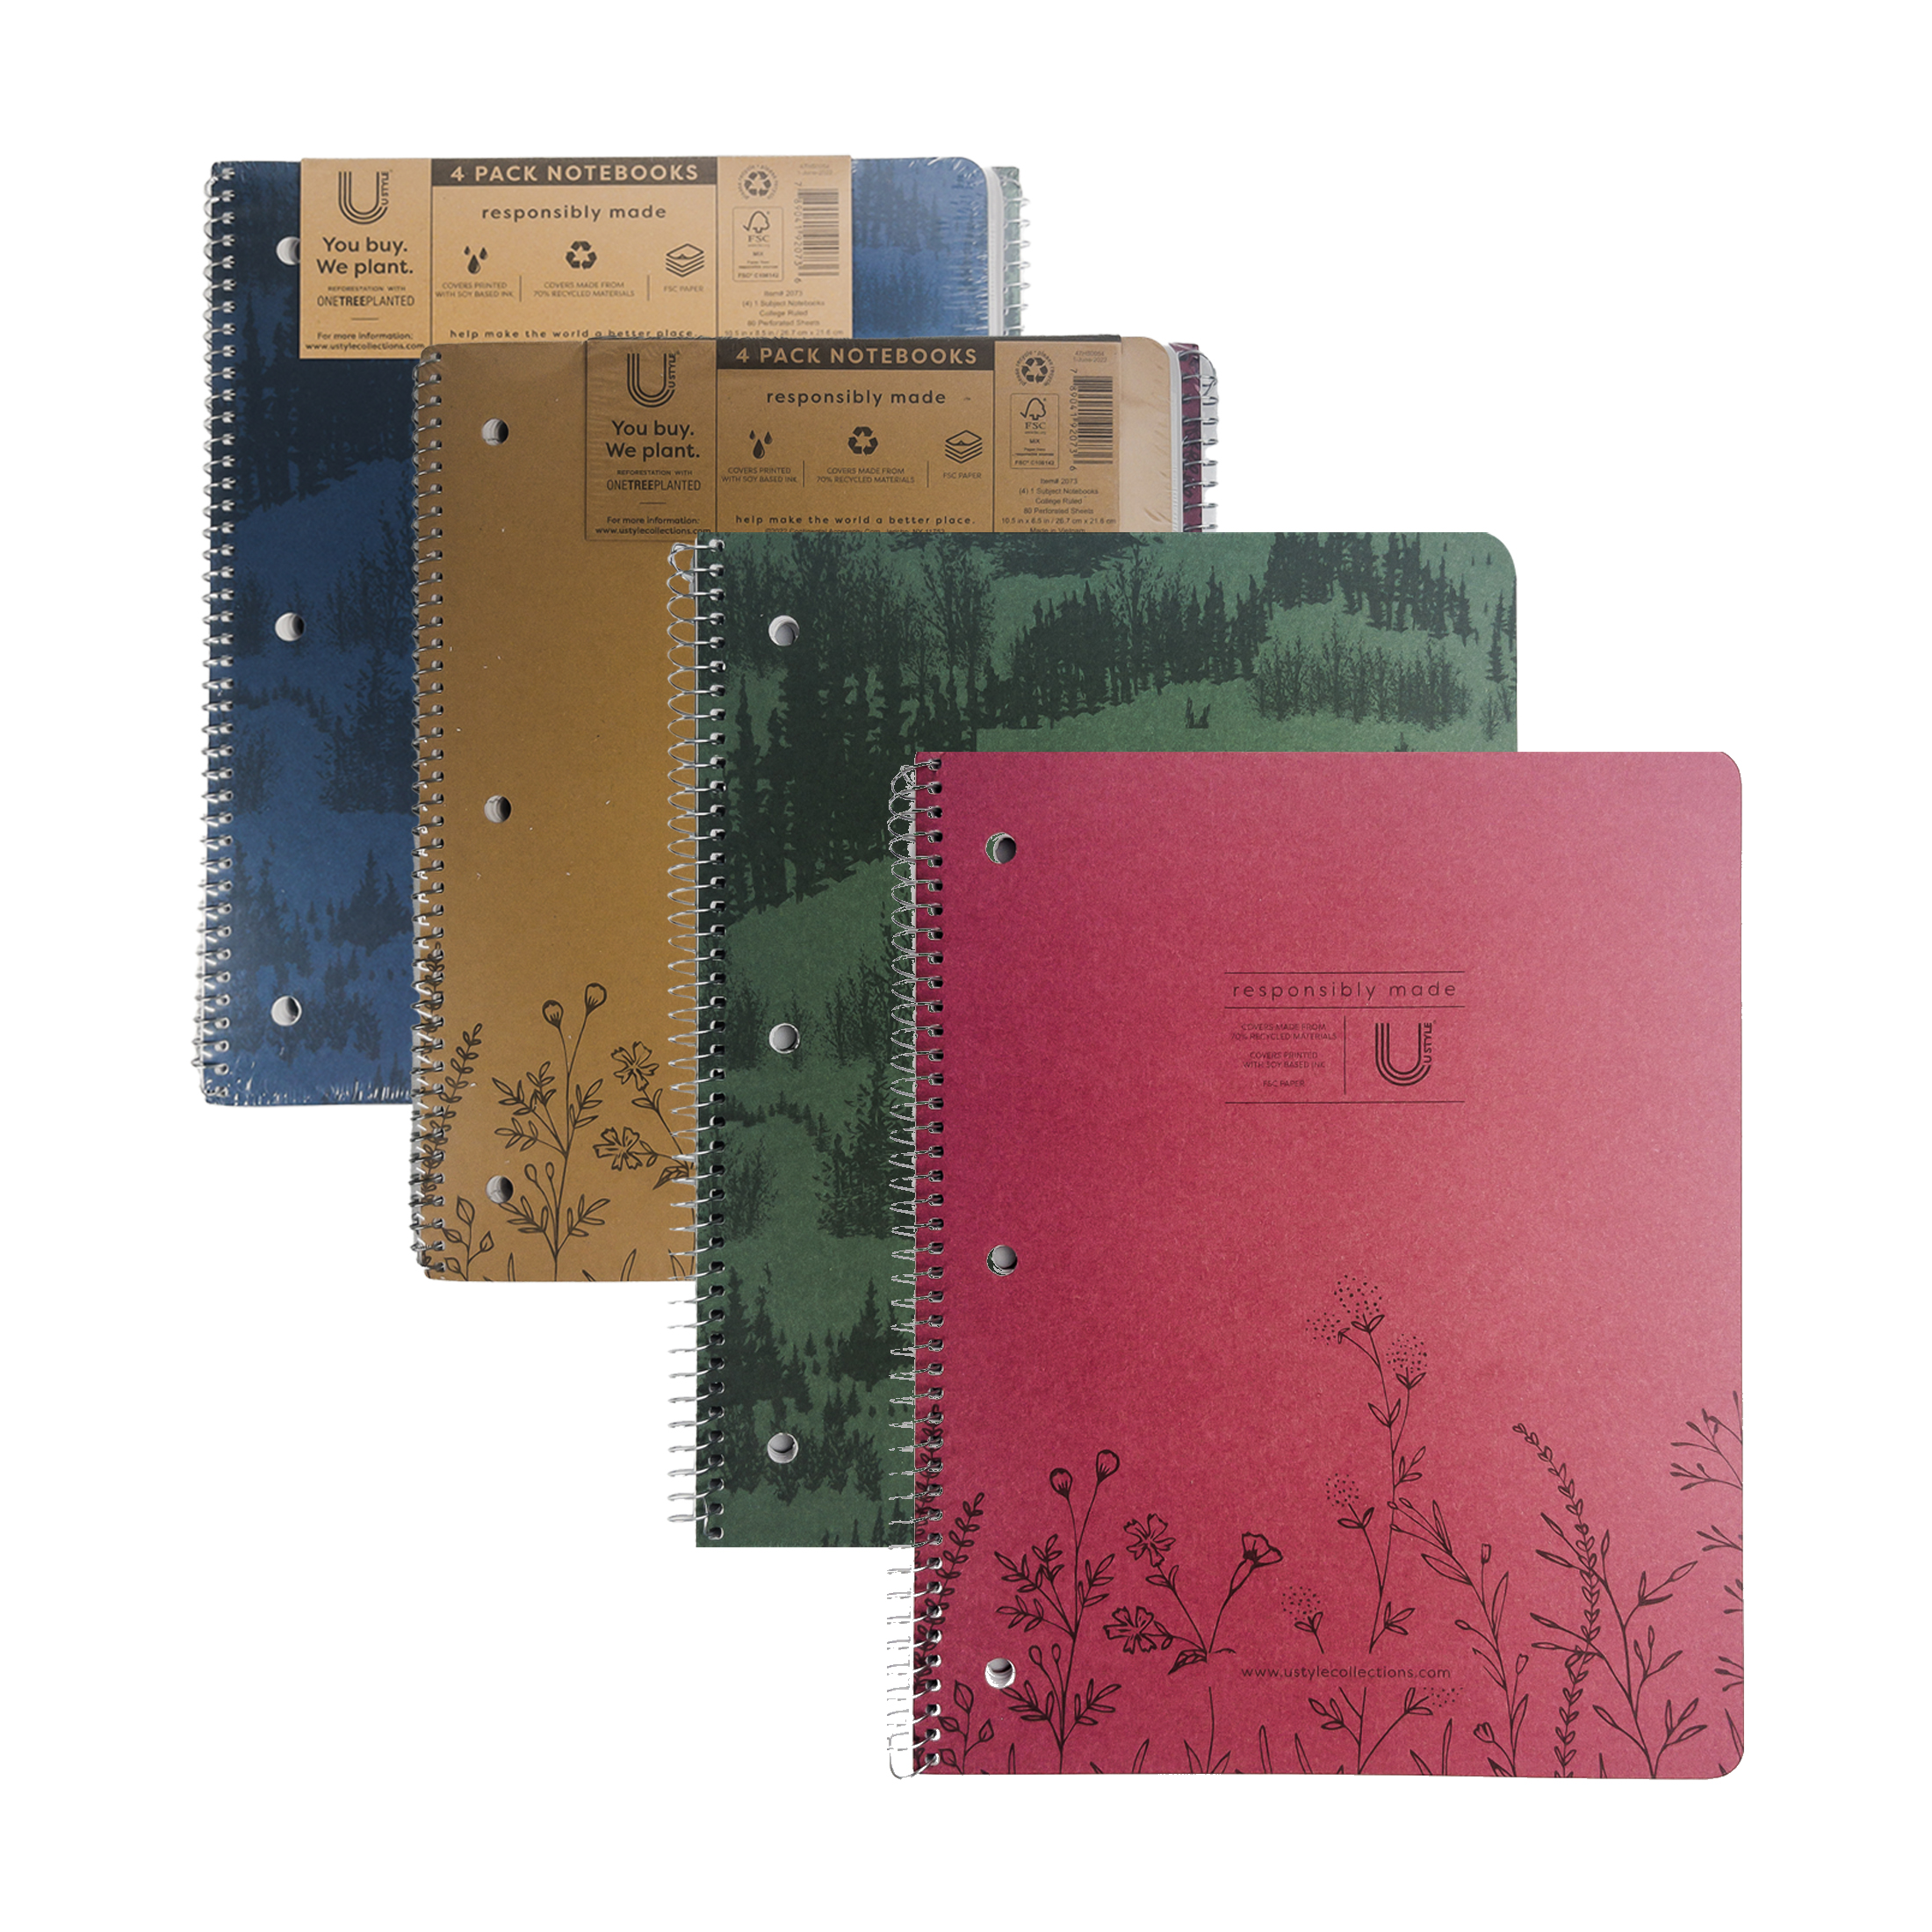 U Style Eco-Friendly 1 Subject Notebook, 80 Sheets, College Rule, 4 Pack - image 1 of 13